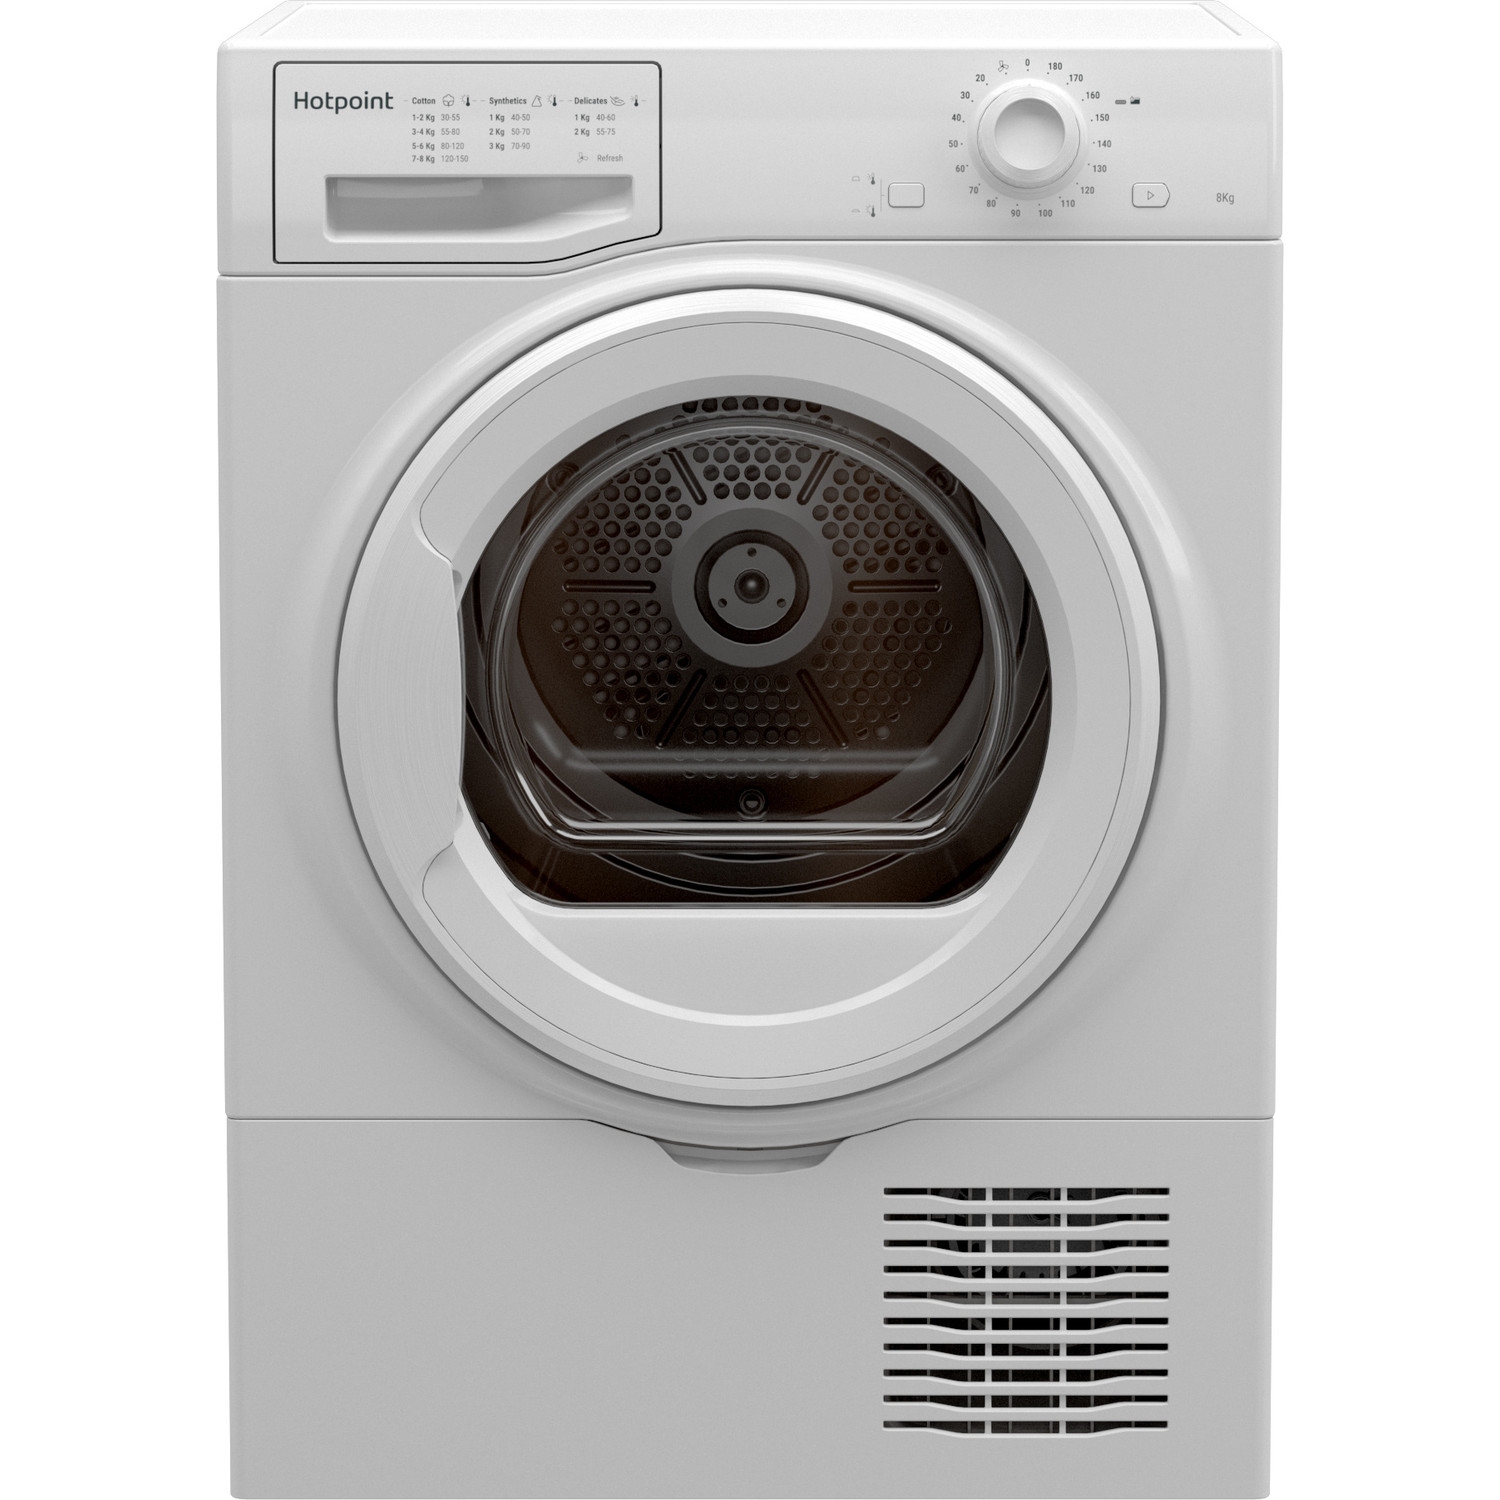 Hotpoint H2D81WEUK 8kg Condensor Tumble Dryer - White - 0